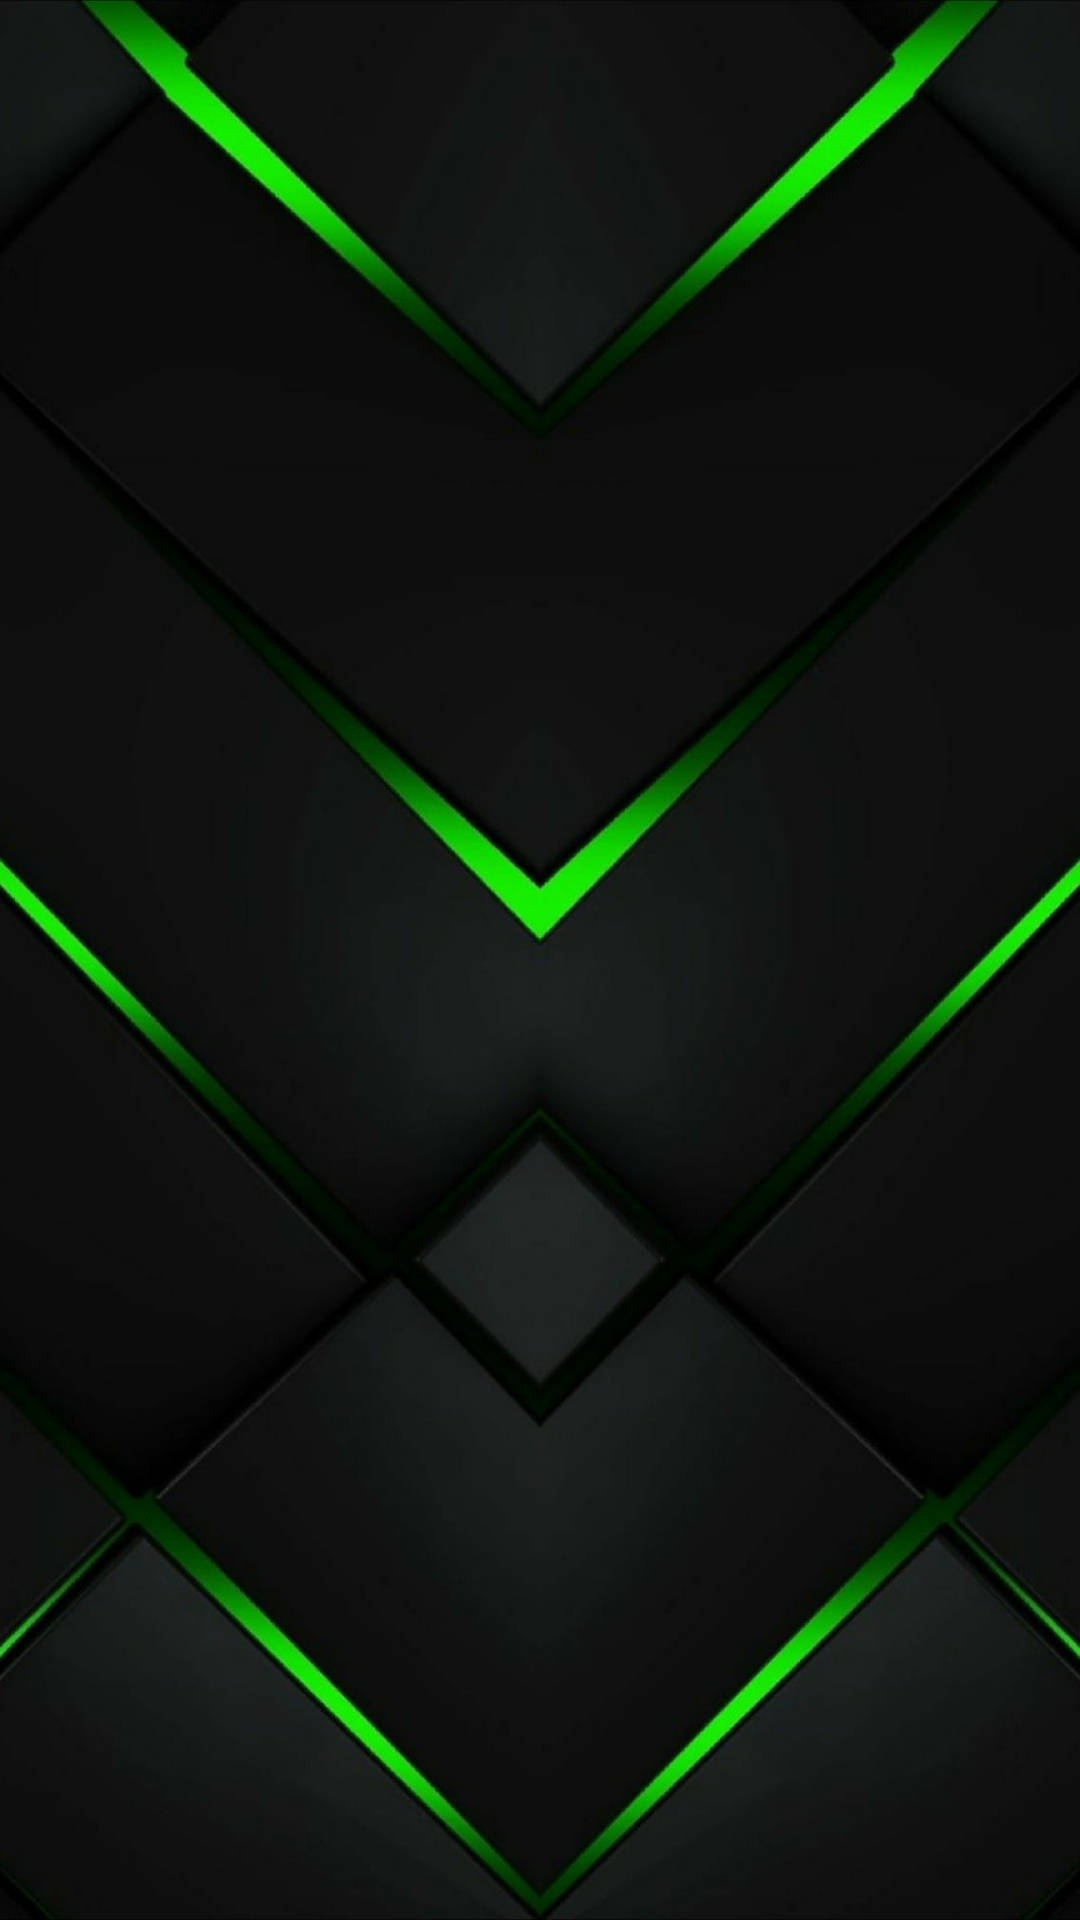 3D Material Neon Green And Black Pattern Wallpaper